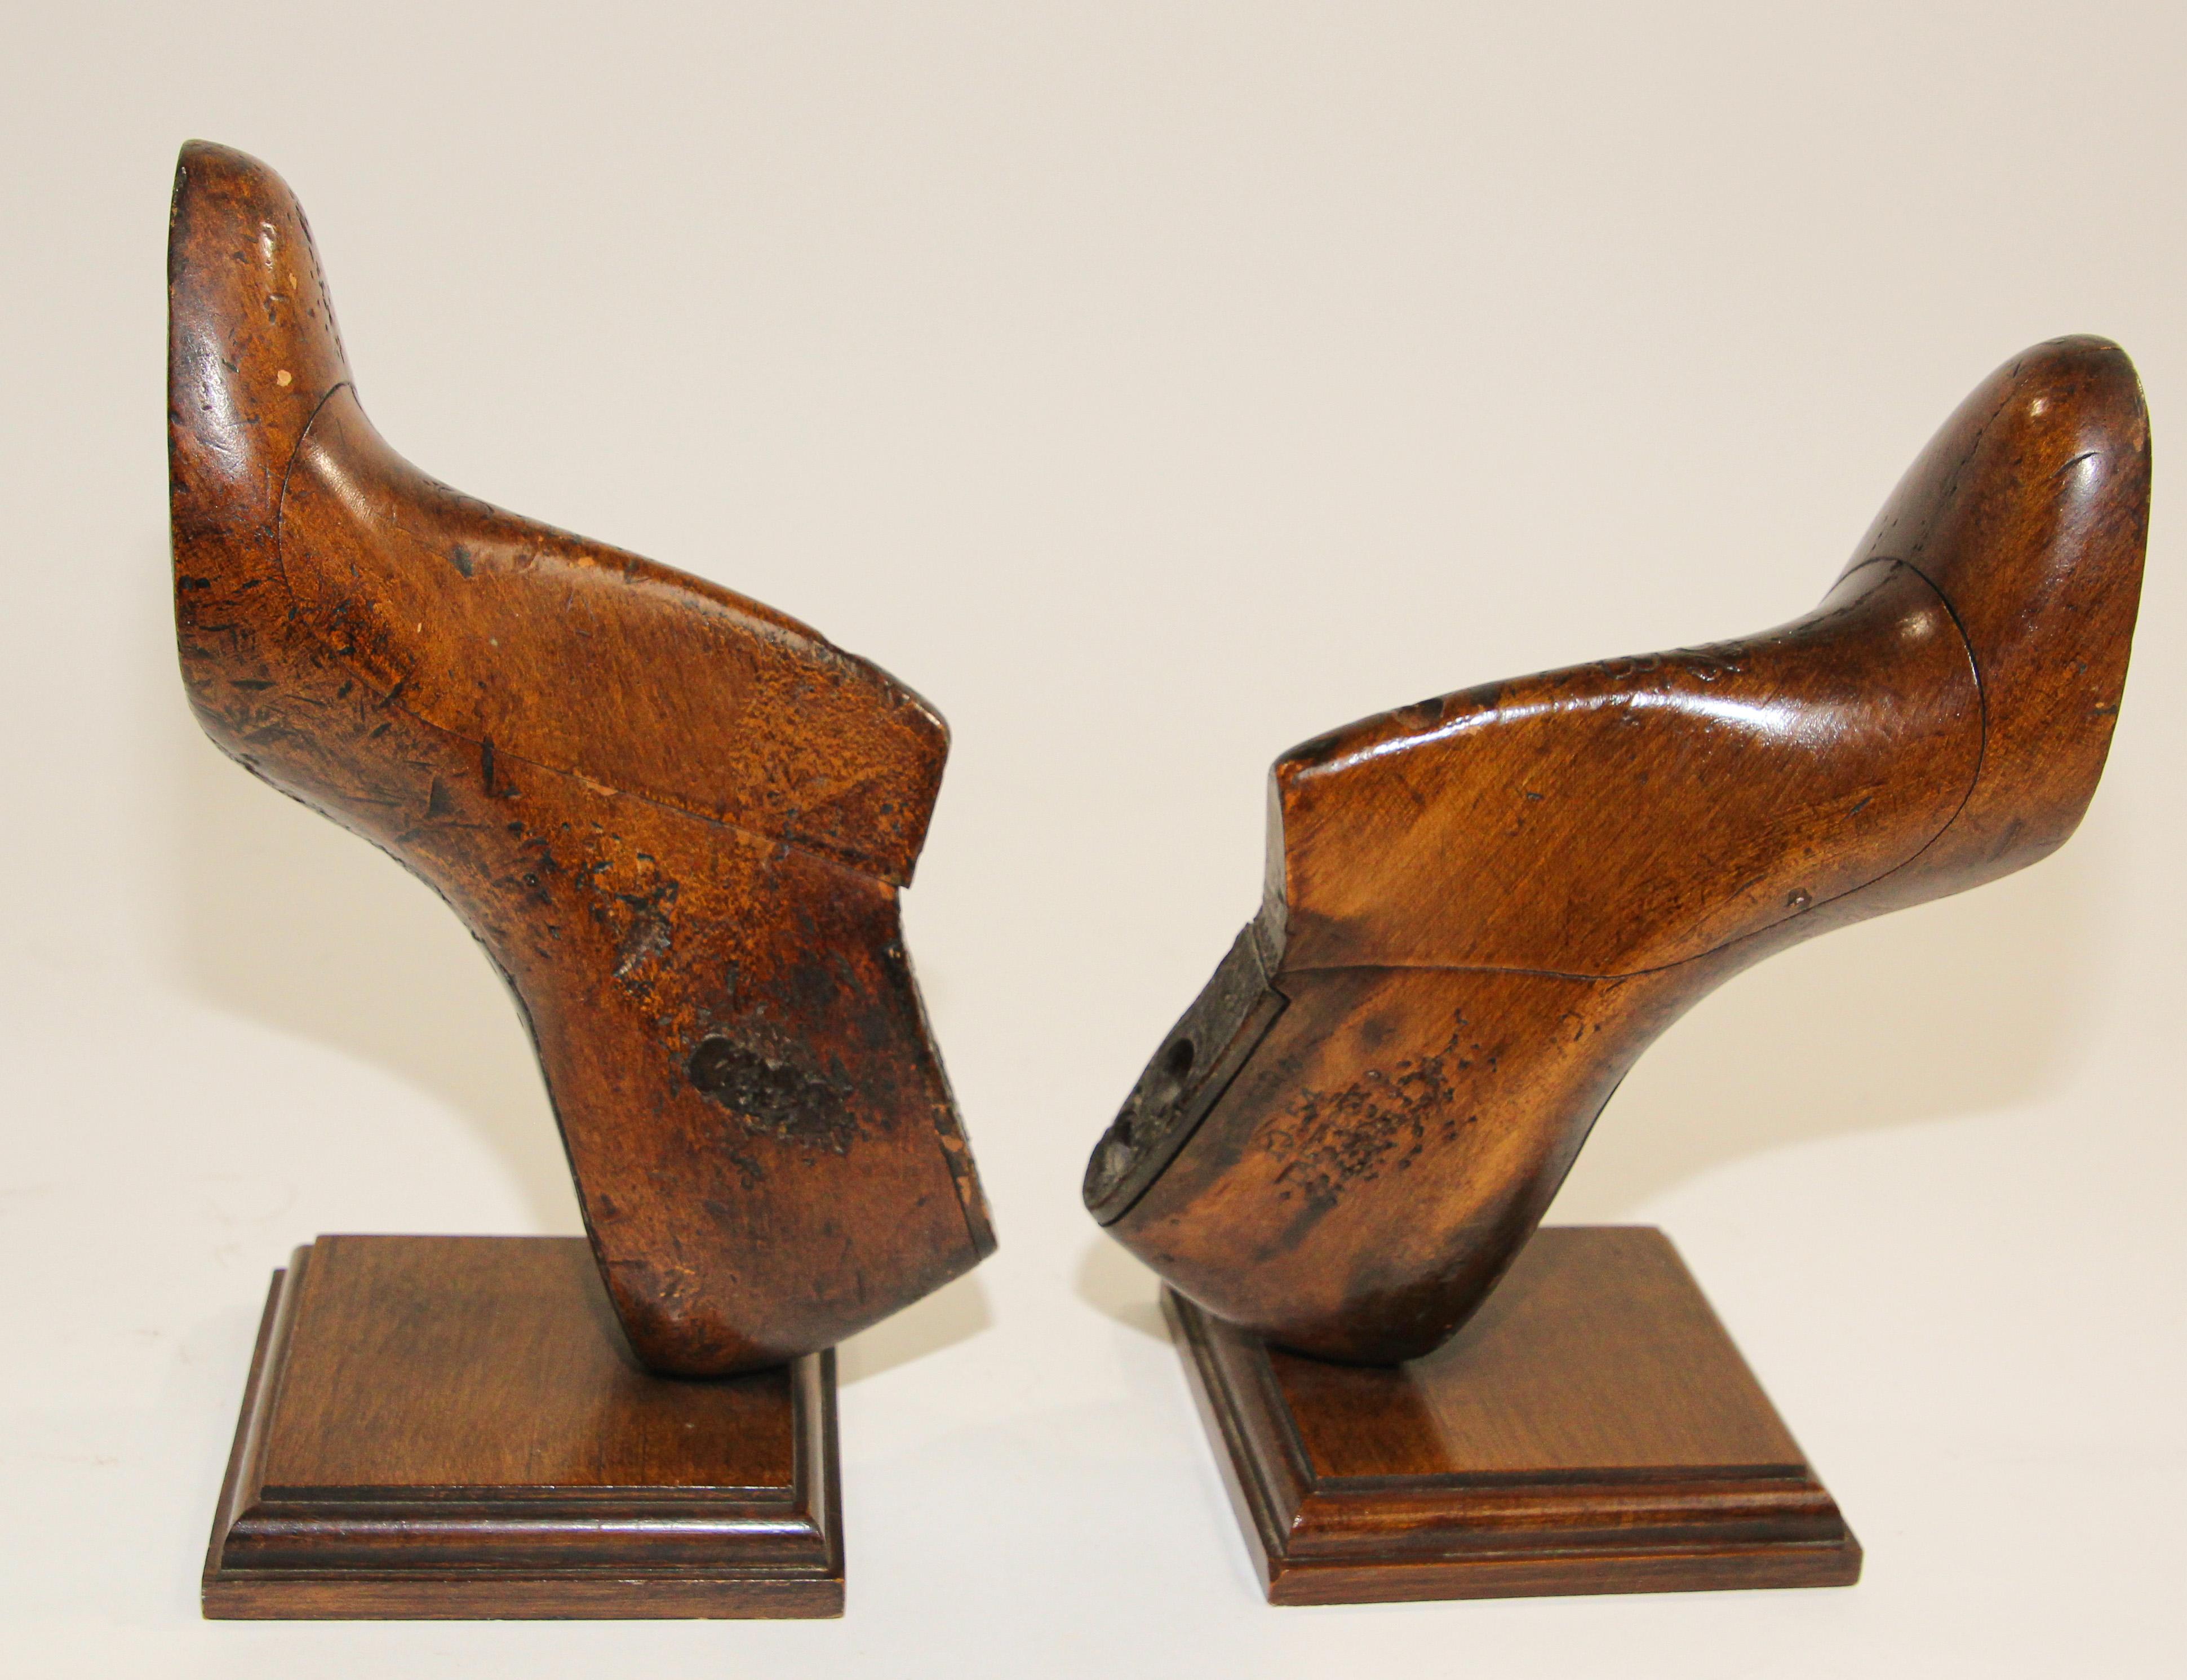 Vintage American wood women shoe form molds mounted as bookends
Vintage wooden shoe making mold from the 1930s.
A pair of shoe form bookends, these well carved solid wood shoe mould would have been used to make handmade shoes.
These molds were